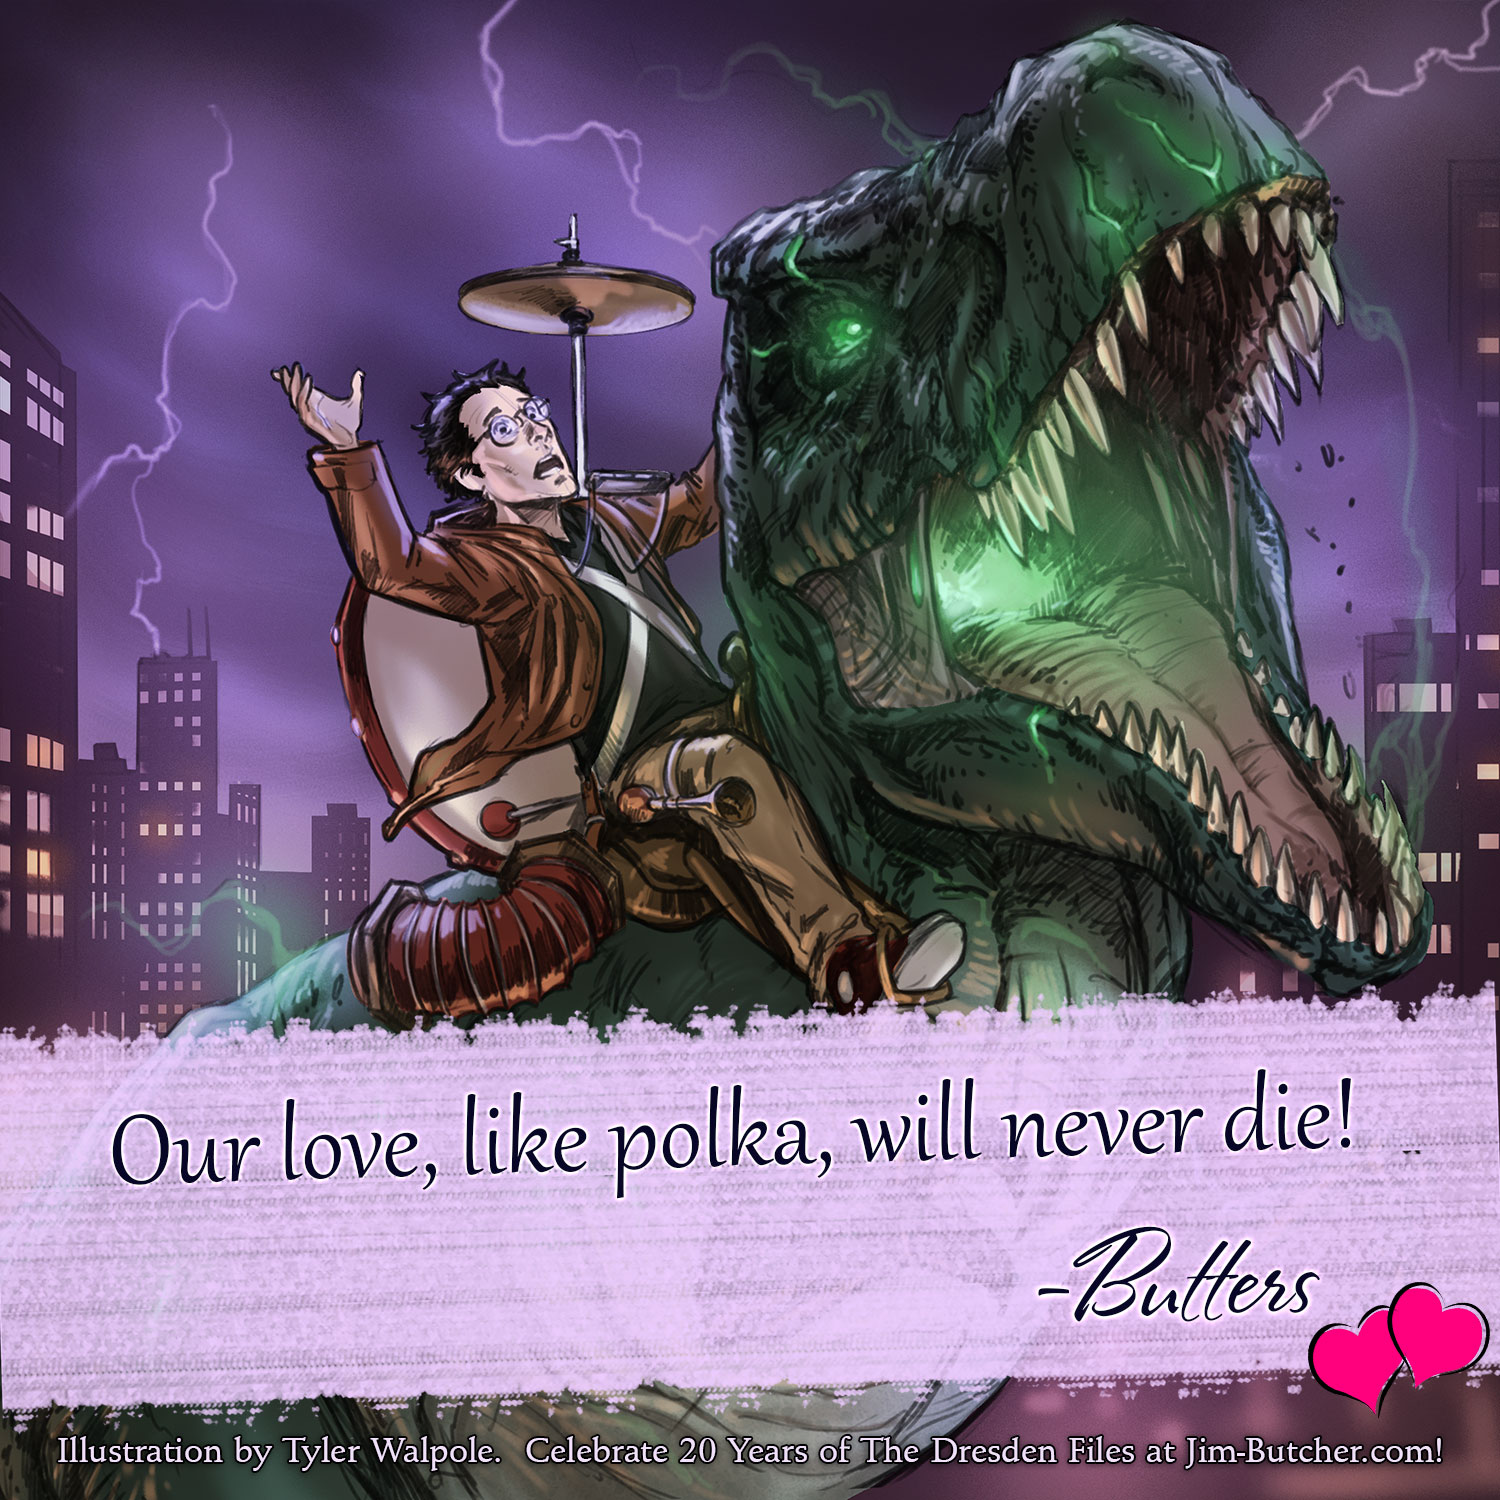 Butters: Our love, like polka, will never die!